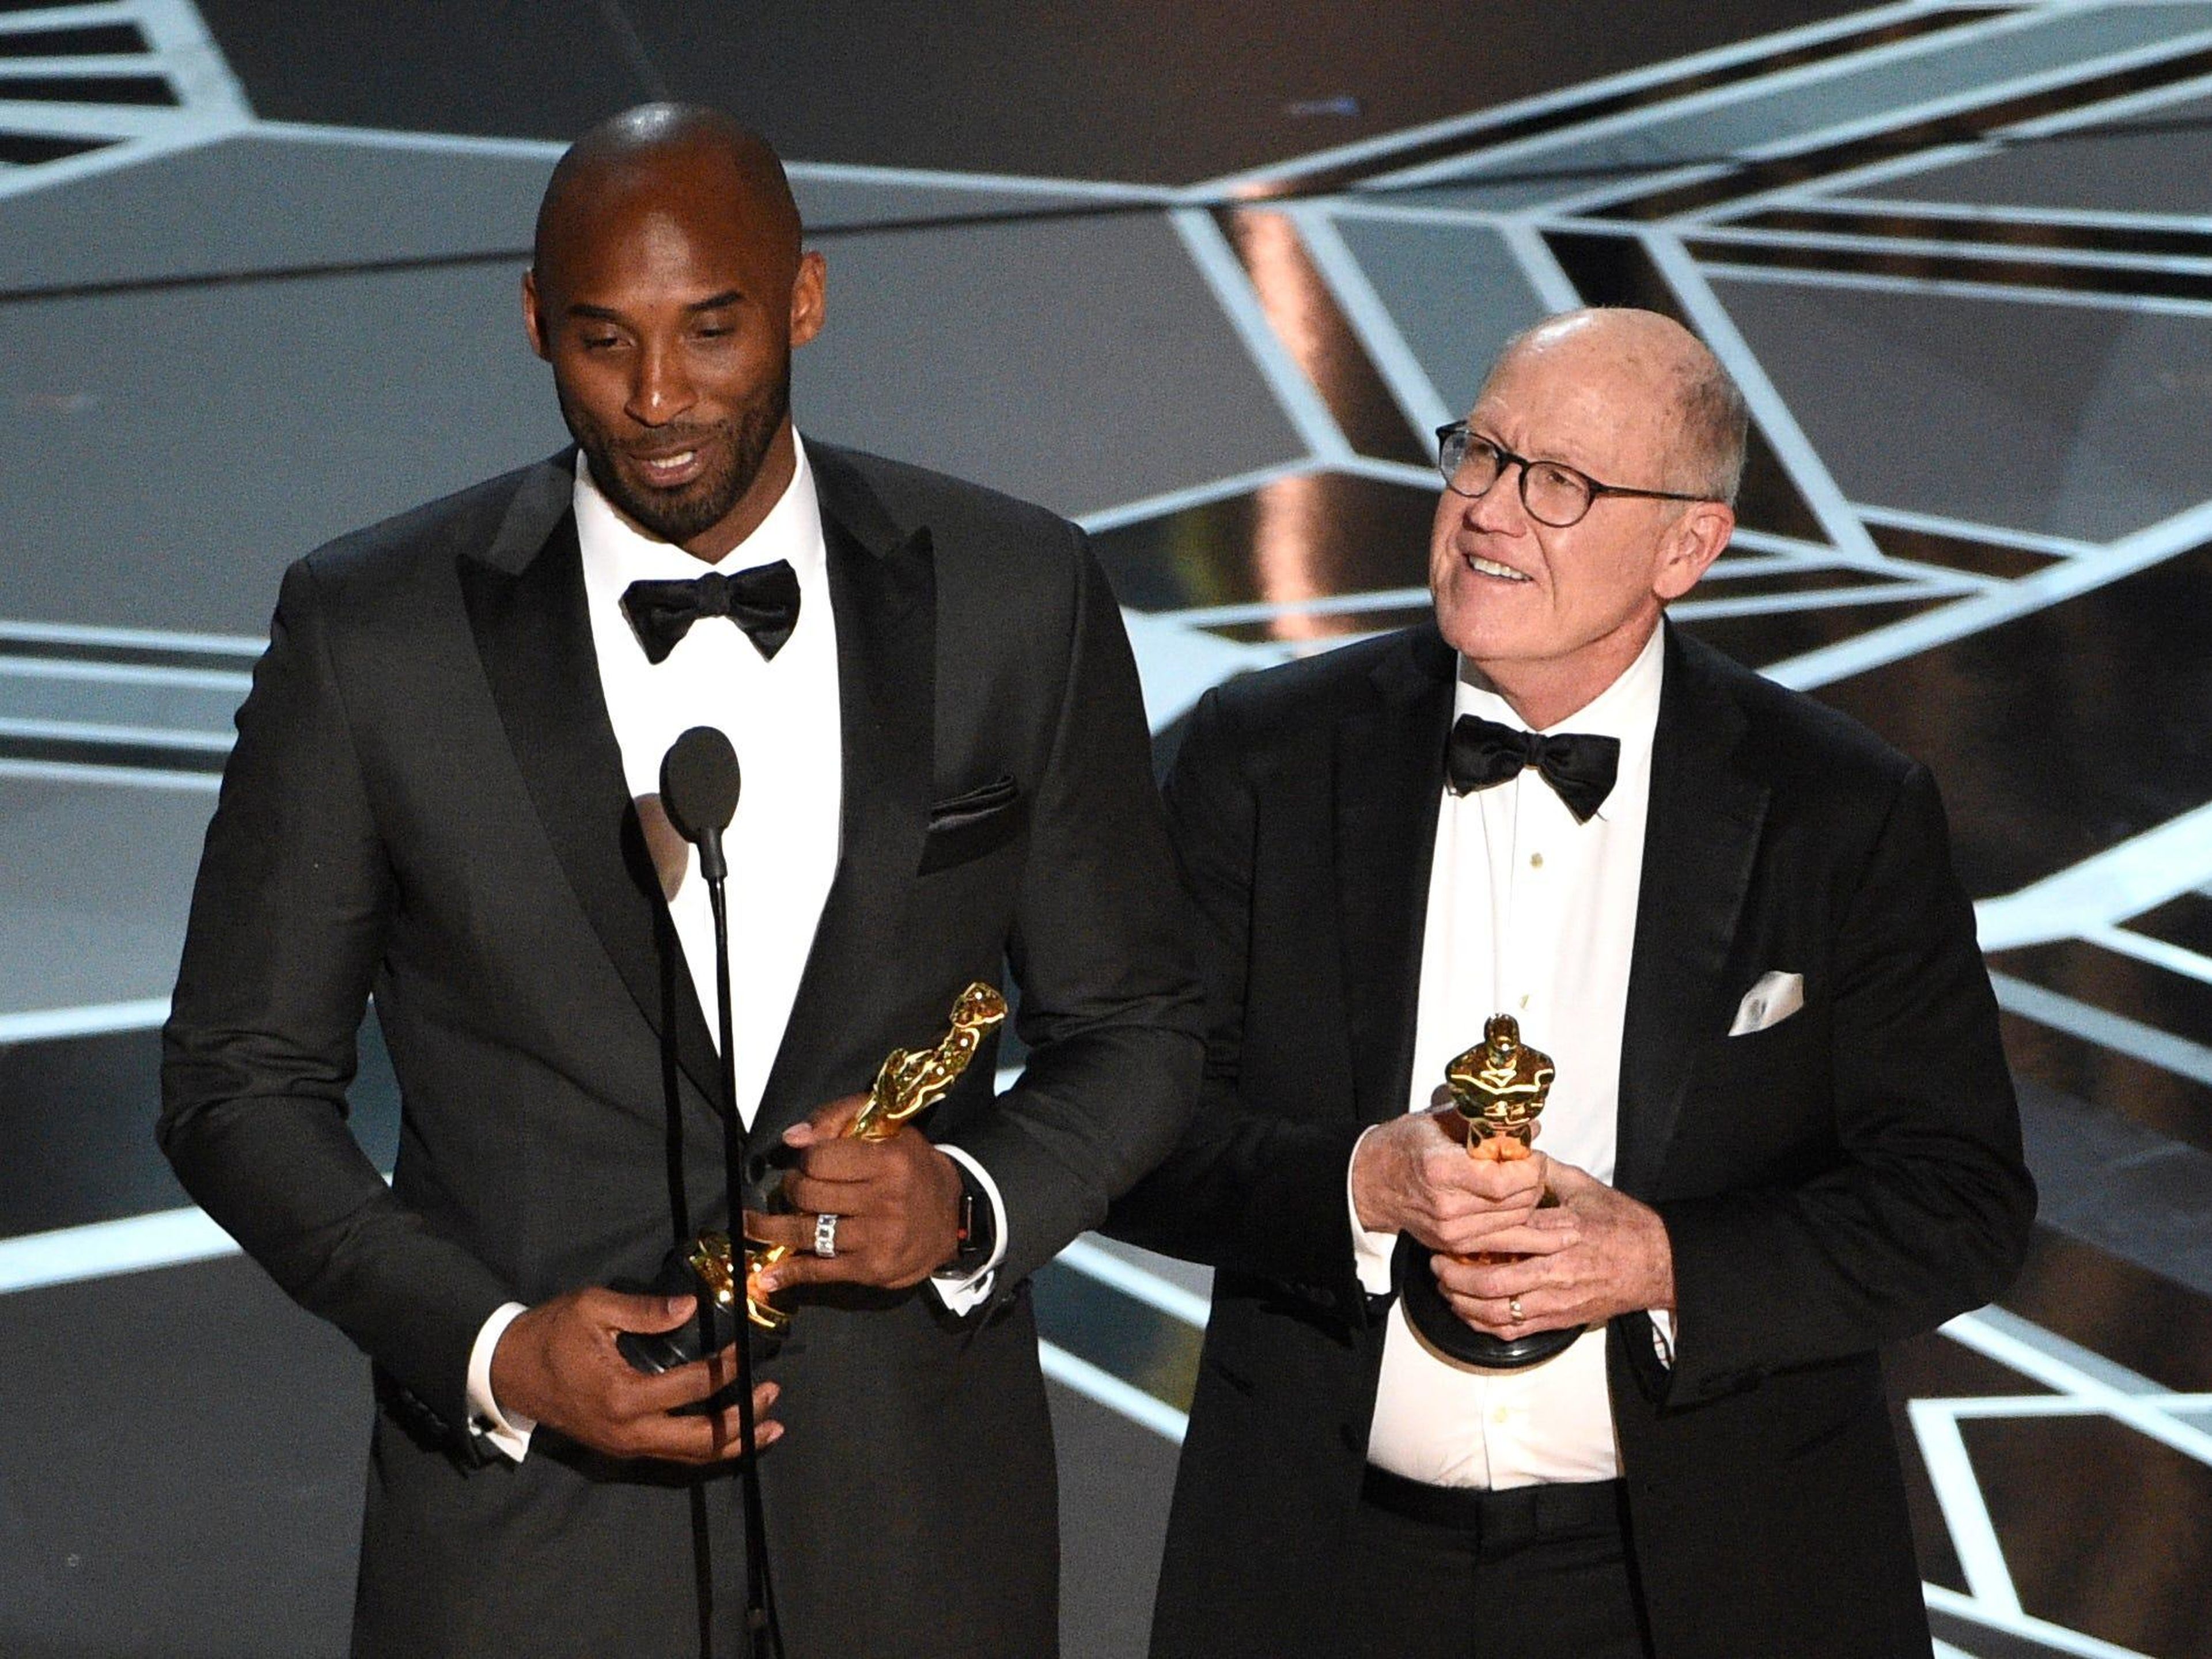 Kobe Bryant (left) and Glen Keane accept the award for best animated short for "Dear Basketball" at the Oscars on Sunday, March 4, 2018.